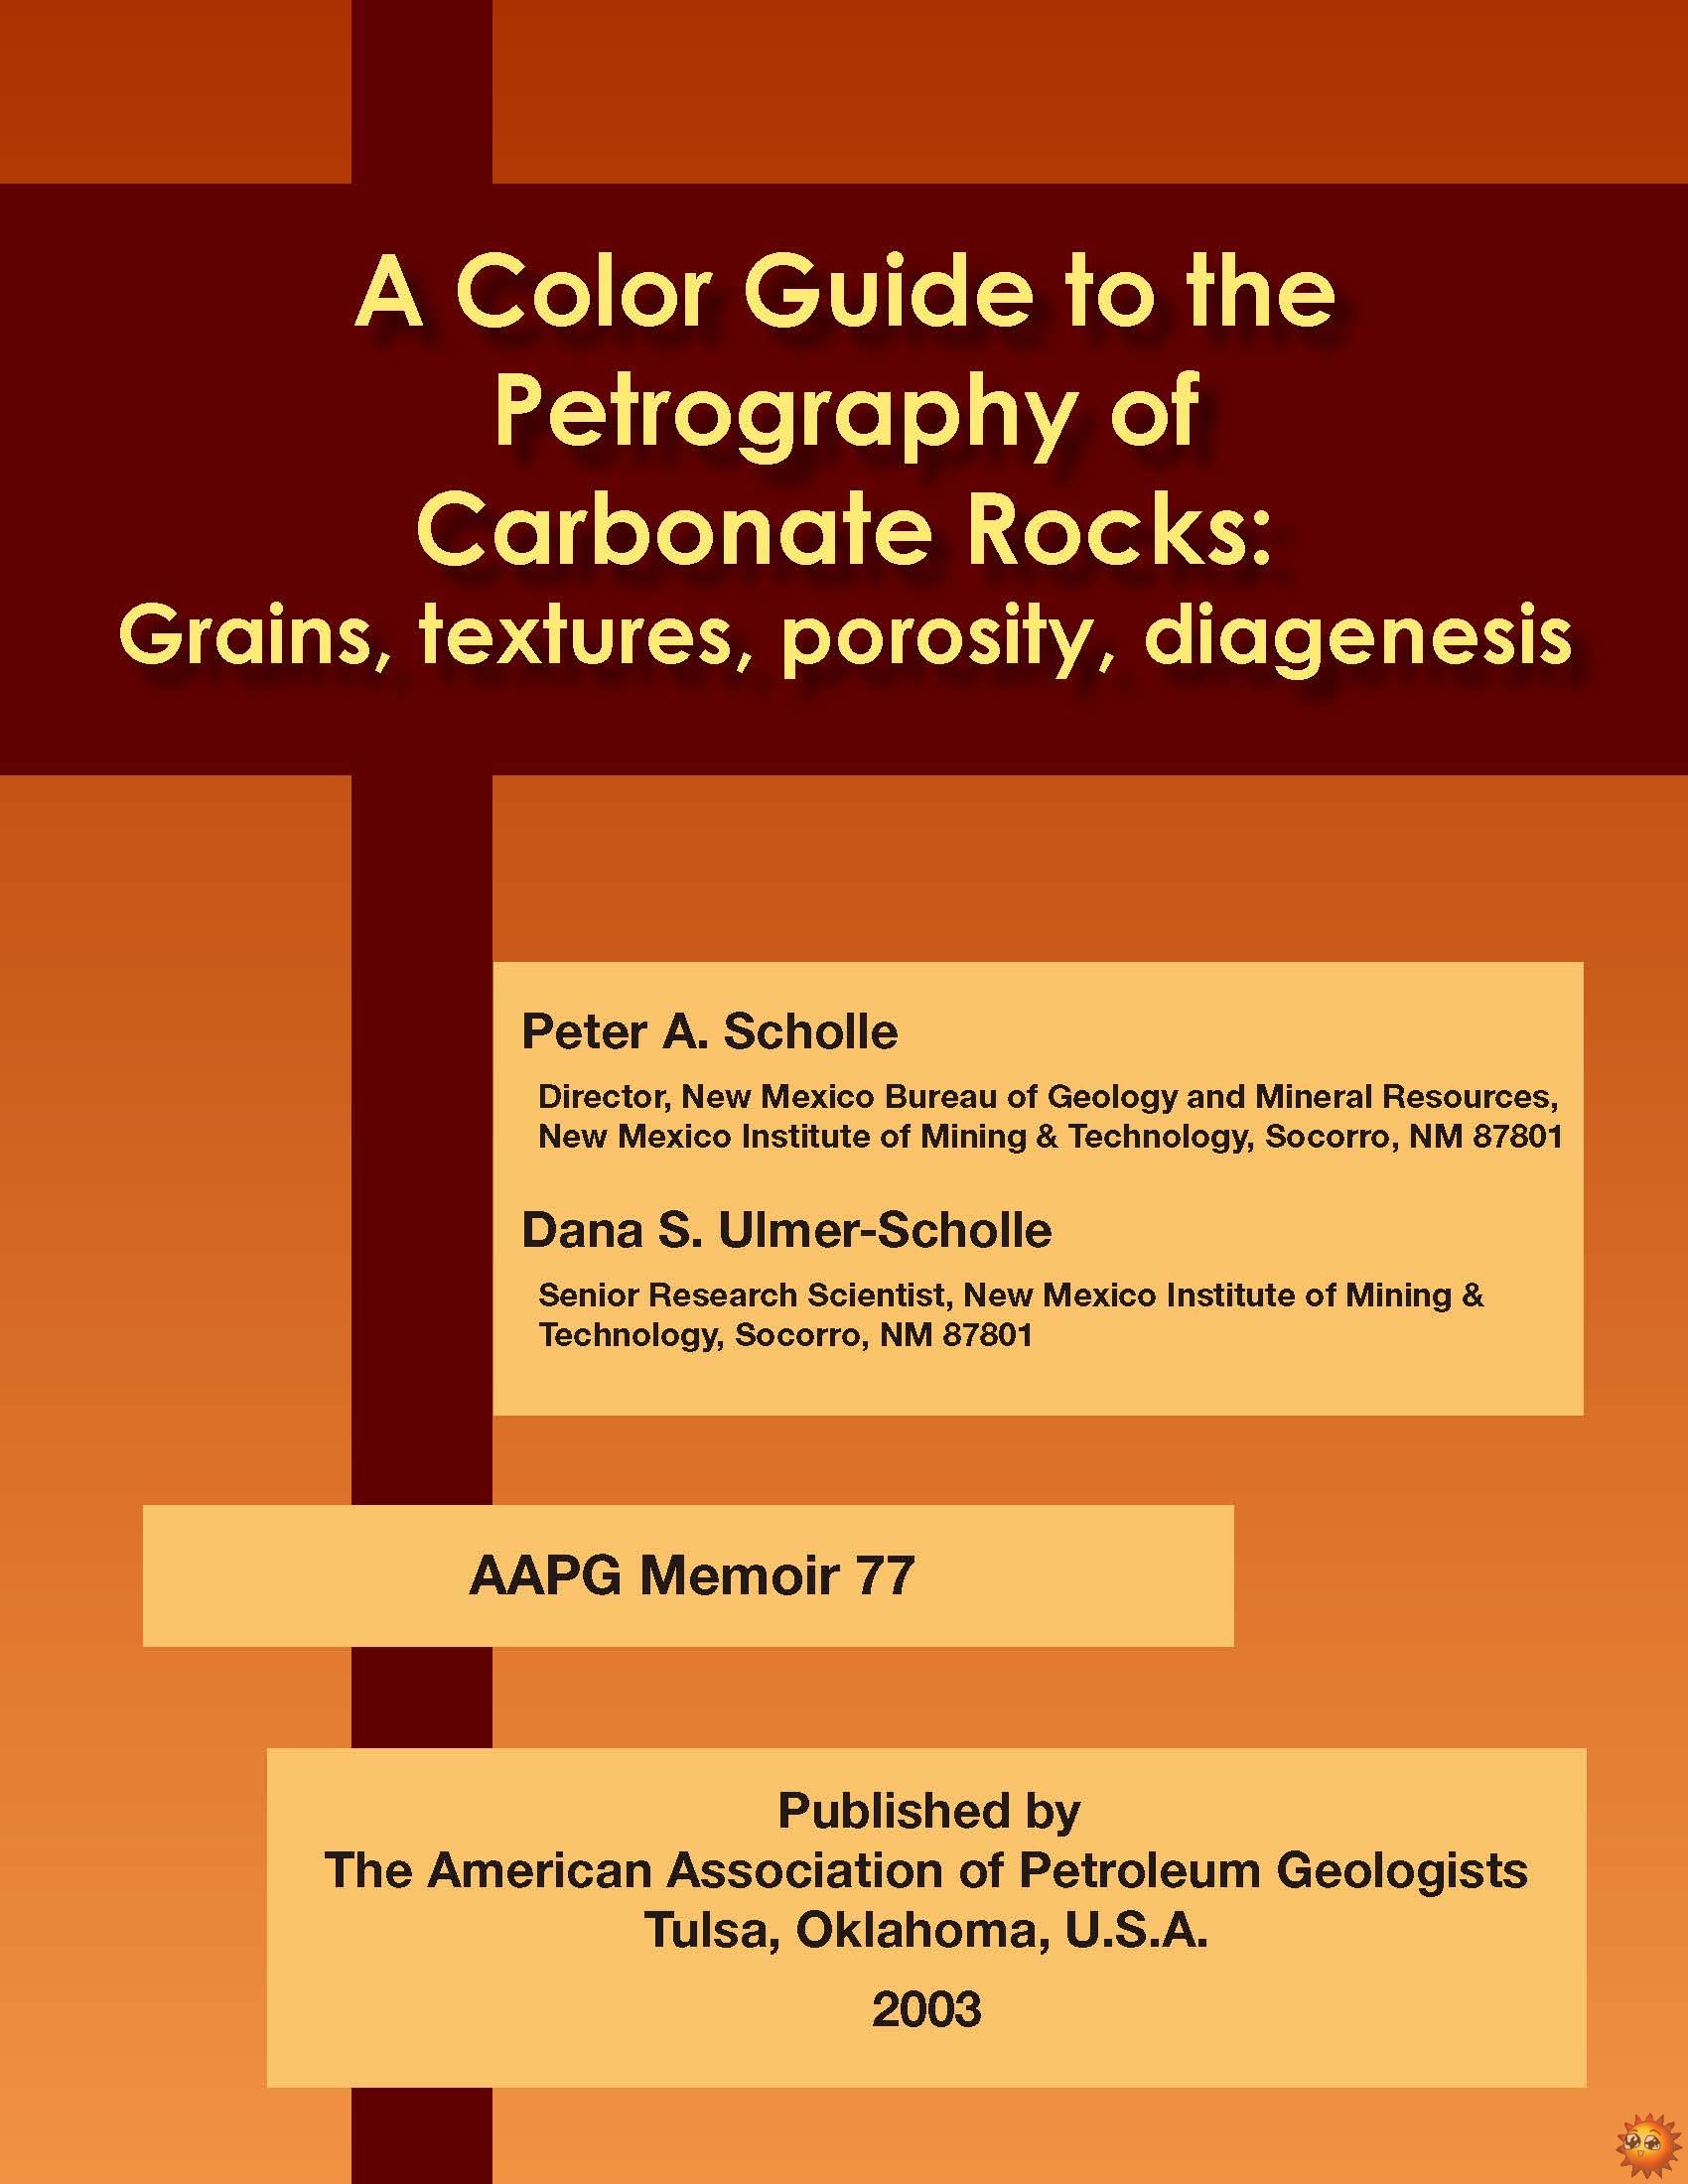 001A_A Color Guide to the Petrography of Carbonate Rocks Grains, Textures, Poros.jpg